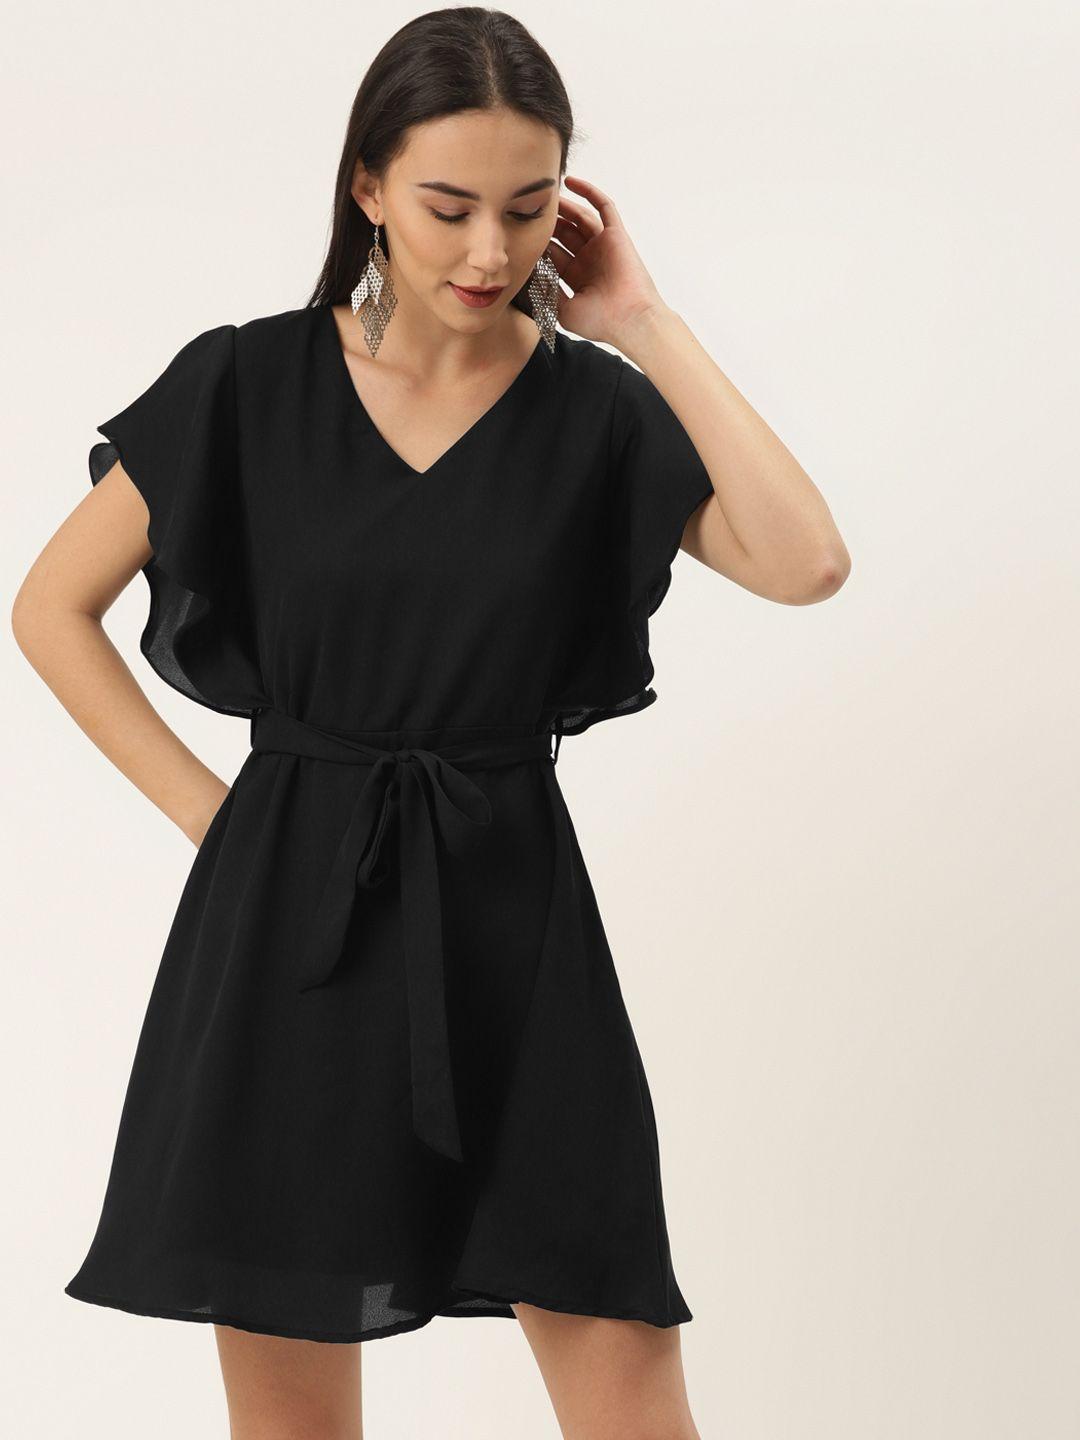 trend arrest women black solid fit and flare dress